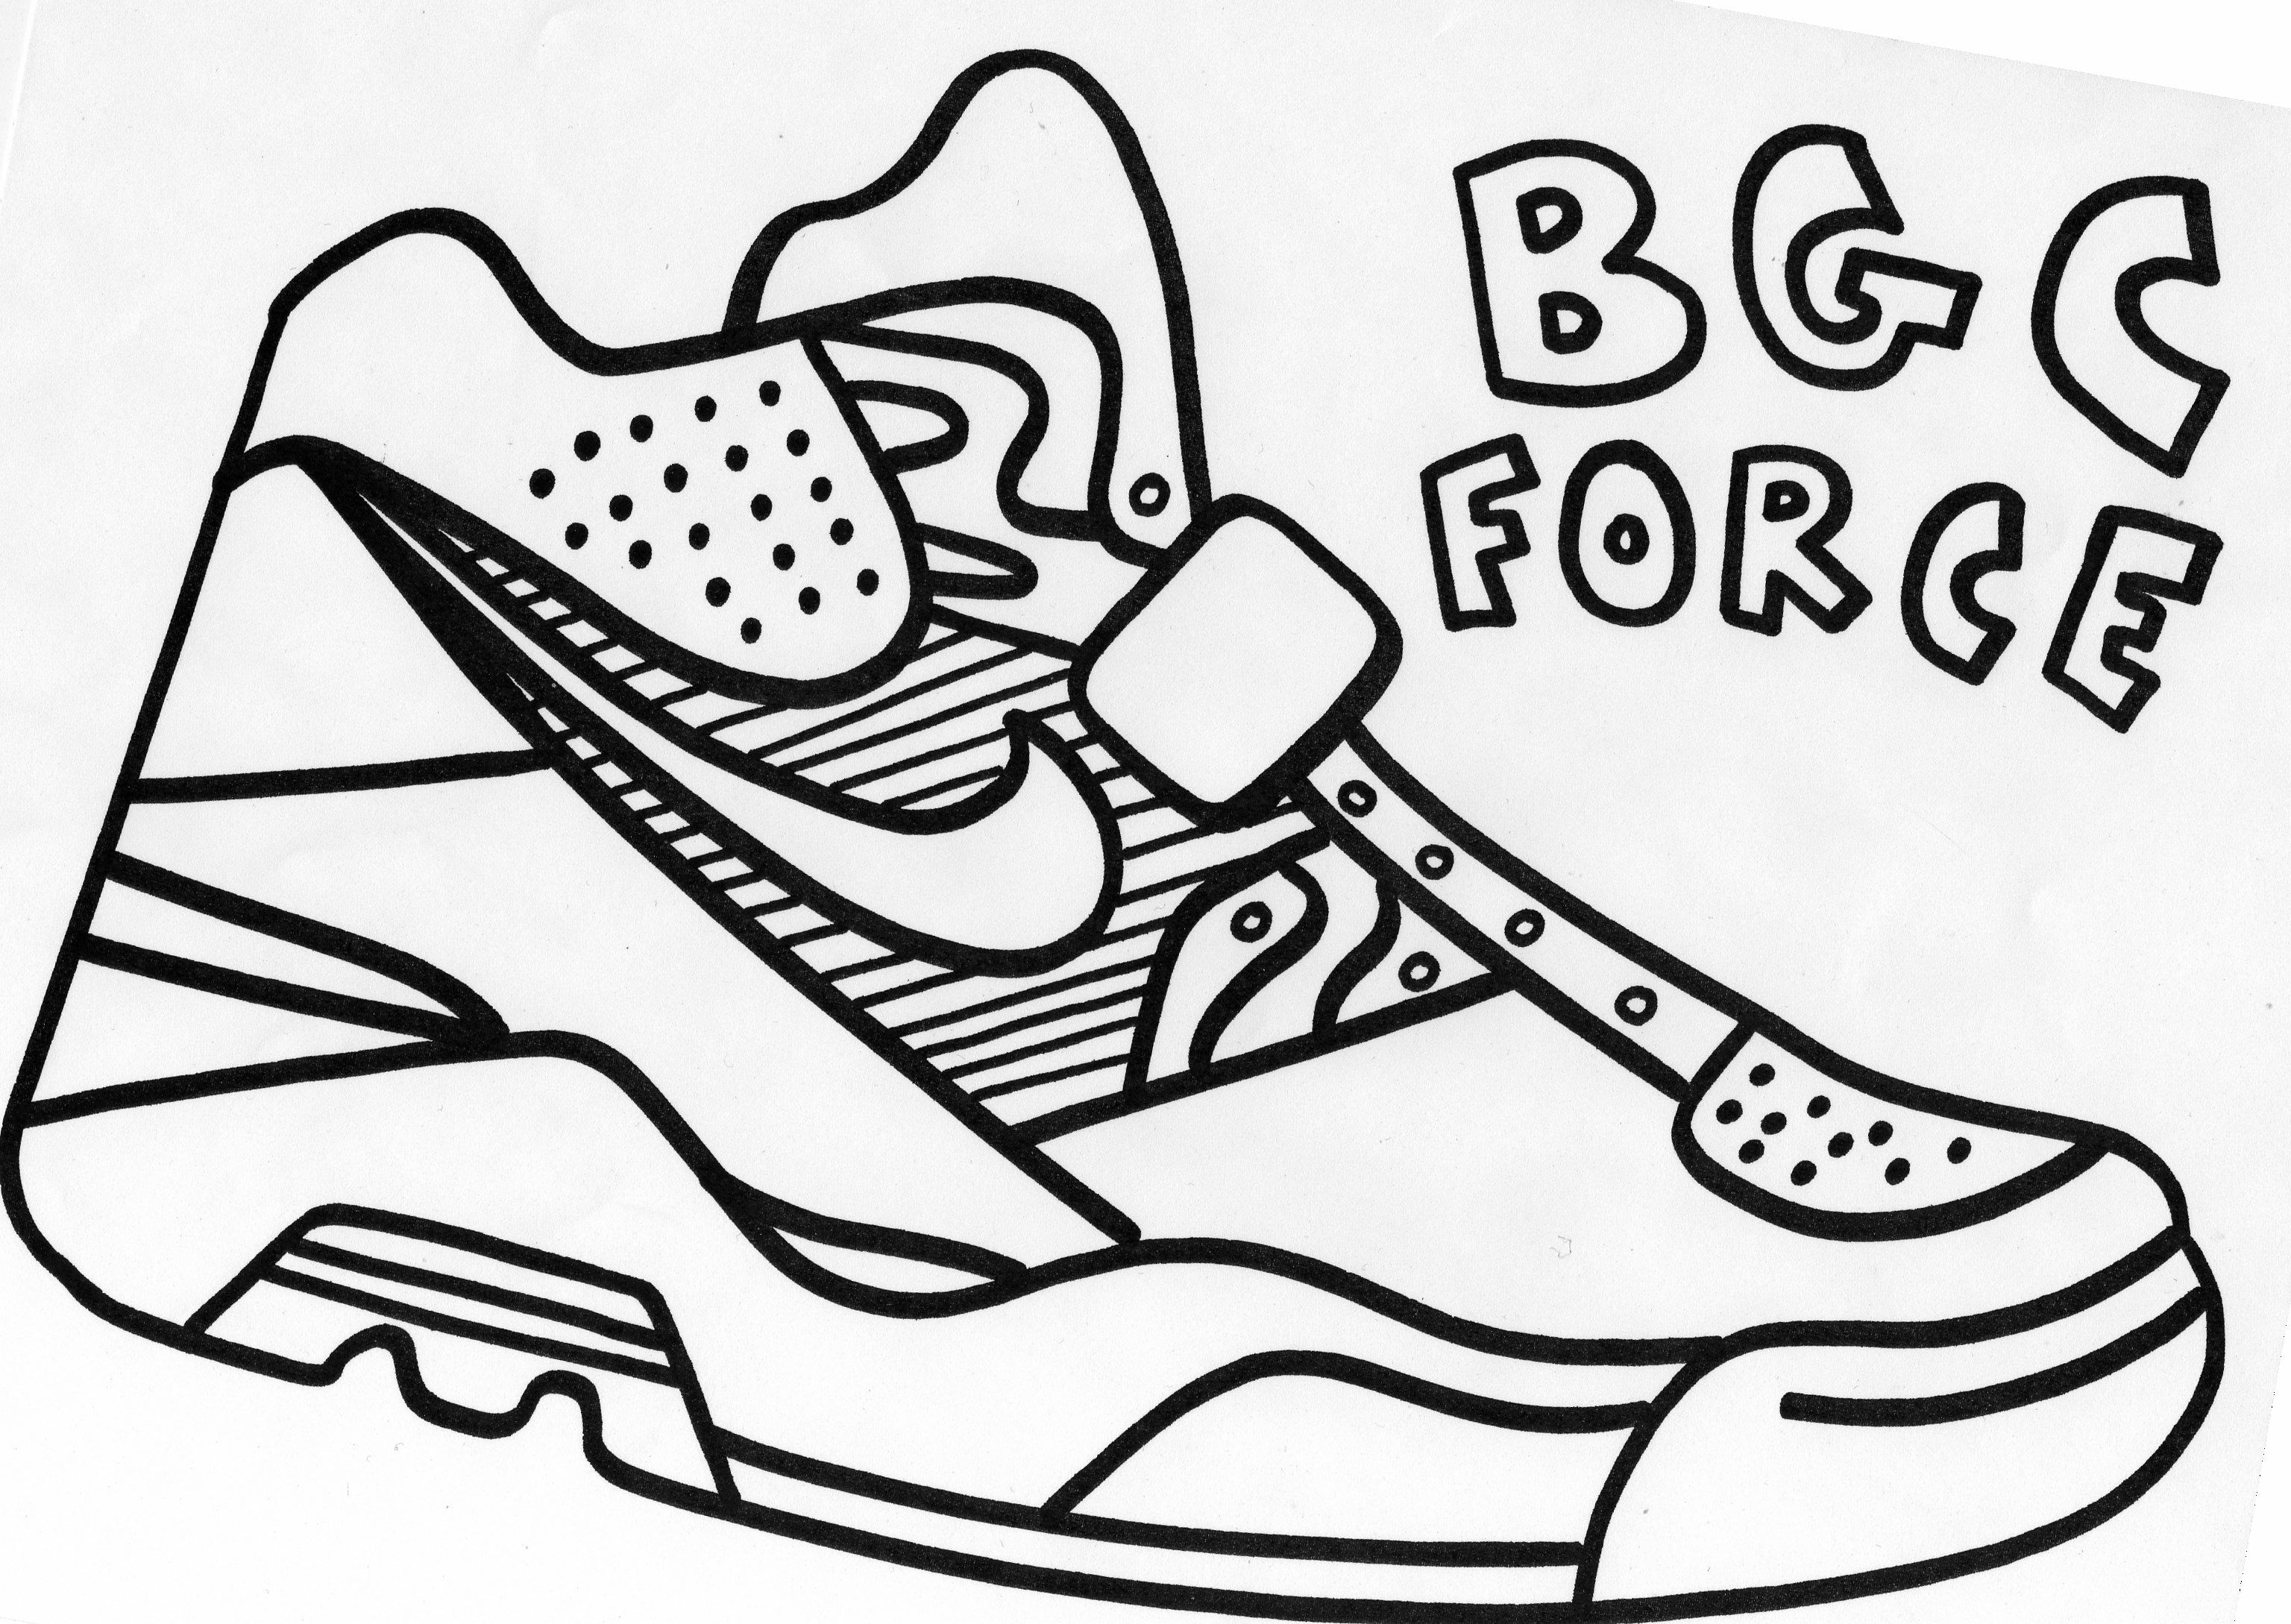 Sneaker Coloring Page Images Galleries With A Bite!